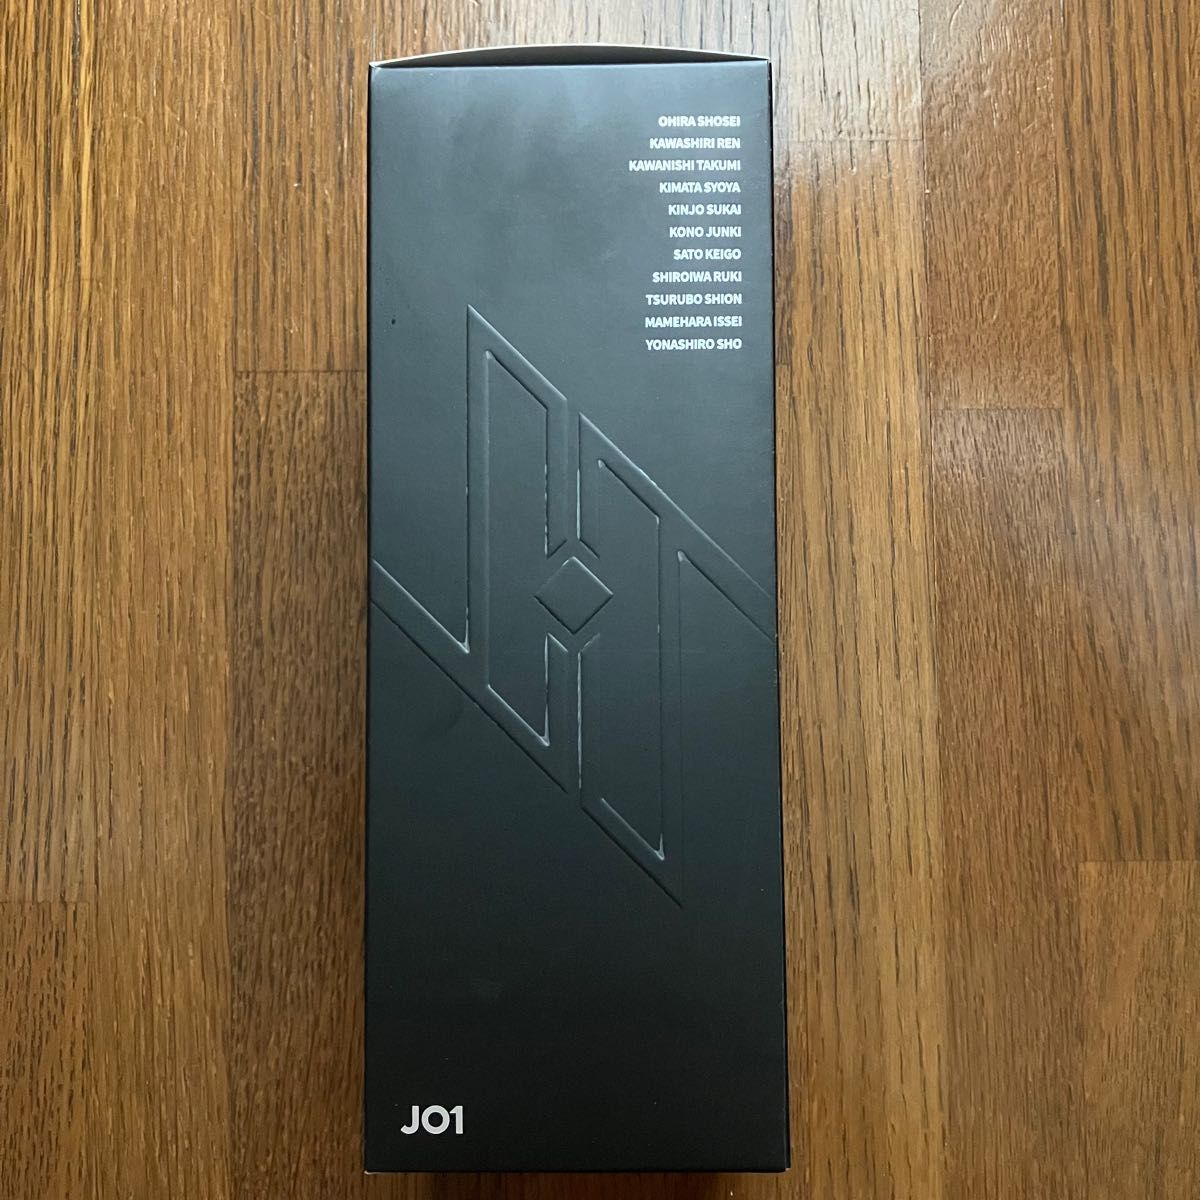 JO1 ペンライト OFFICIAL LIGHT STICK Ver 2｜PayPayフリマ